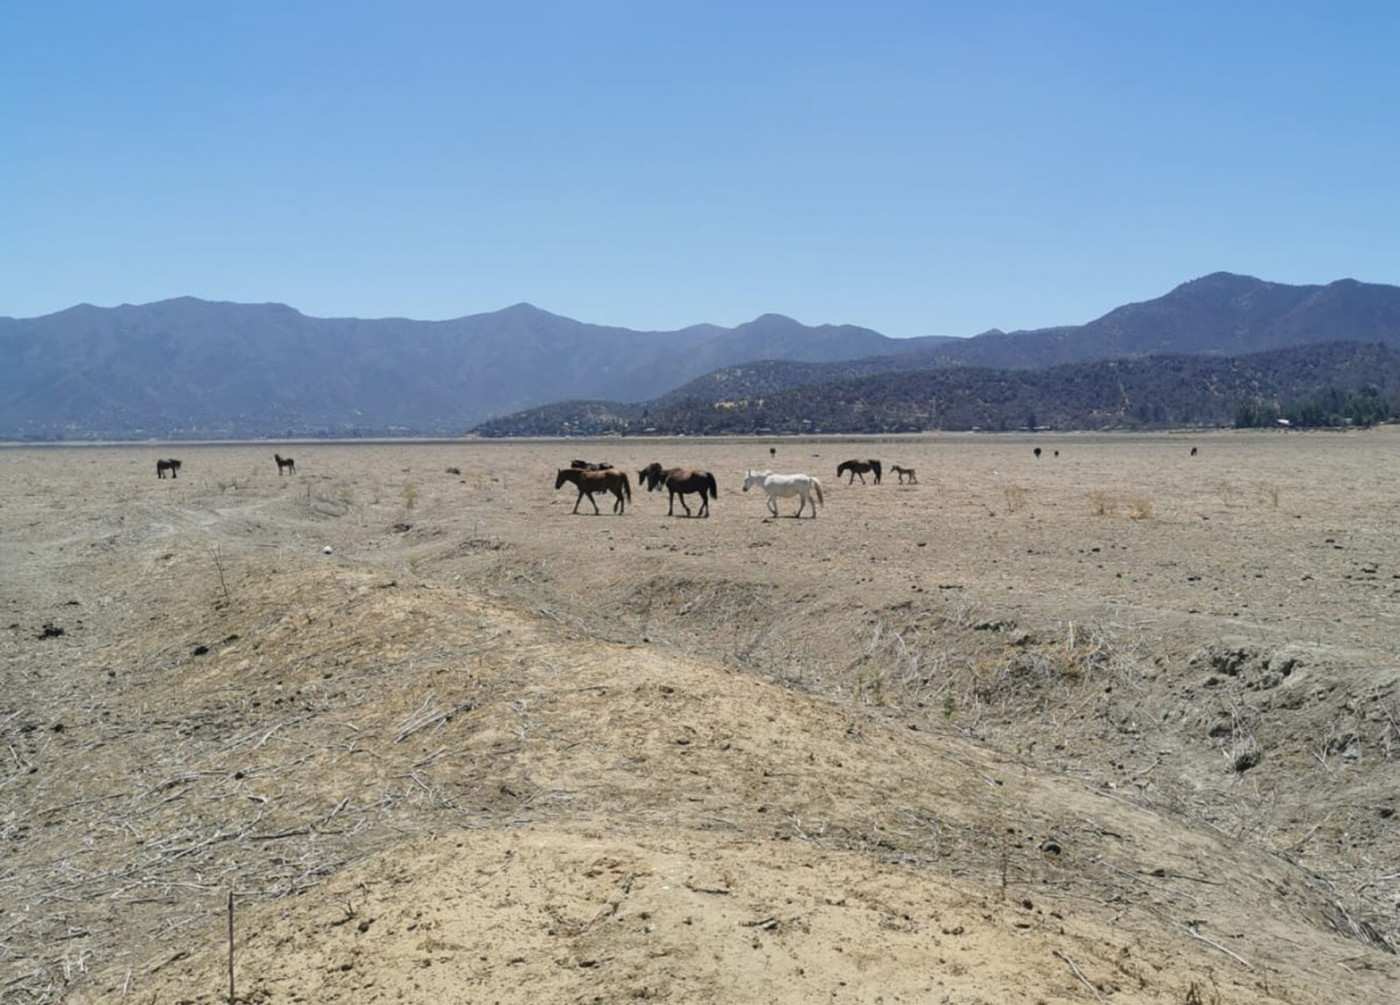 Horses graze on the former Lake Aculeo southwest of Santiago, Chile, in January  2021. The lake completely dried up in May 2018 due to drought, overpumping of groundwater, rapid population growth and agricultural as well as urban diversions. It serves as a cautionary tale for the dwindling Great Salt Lake.